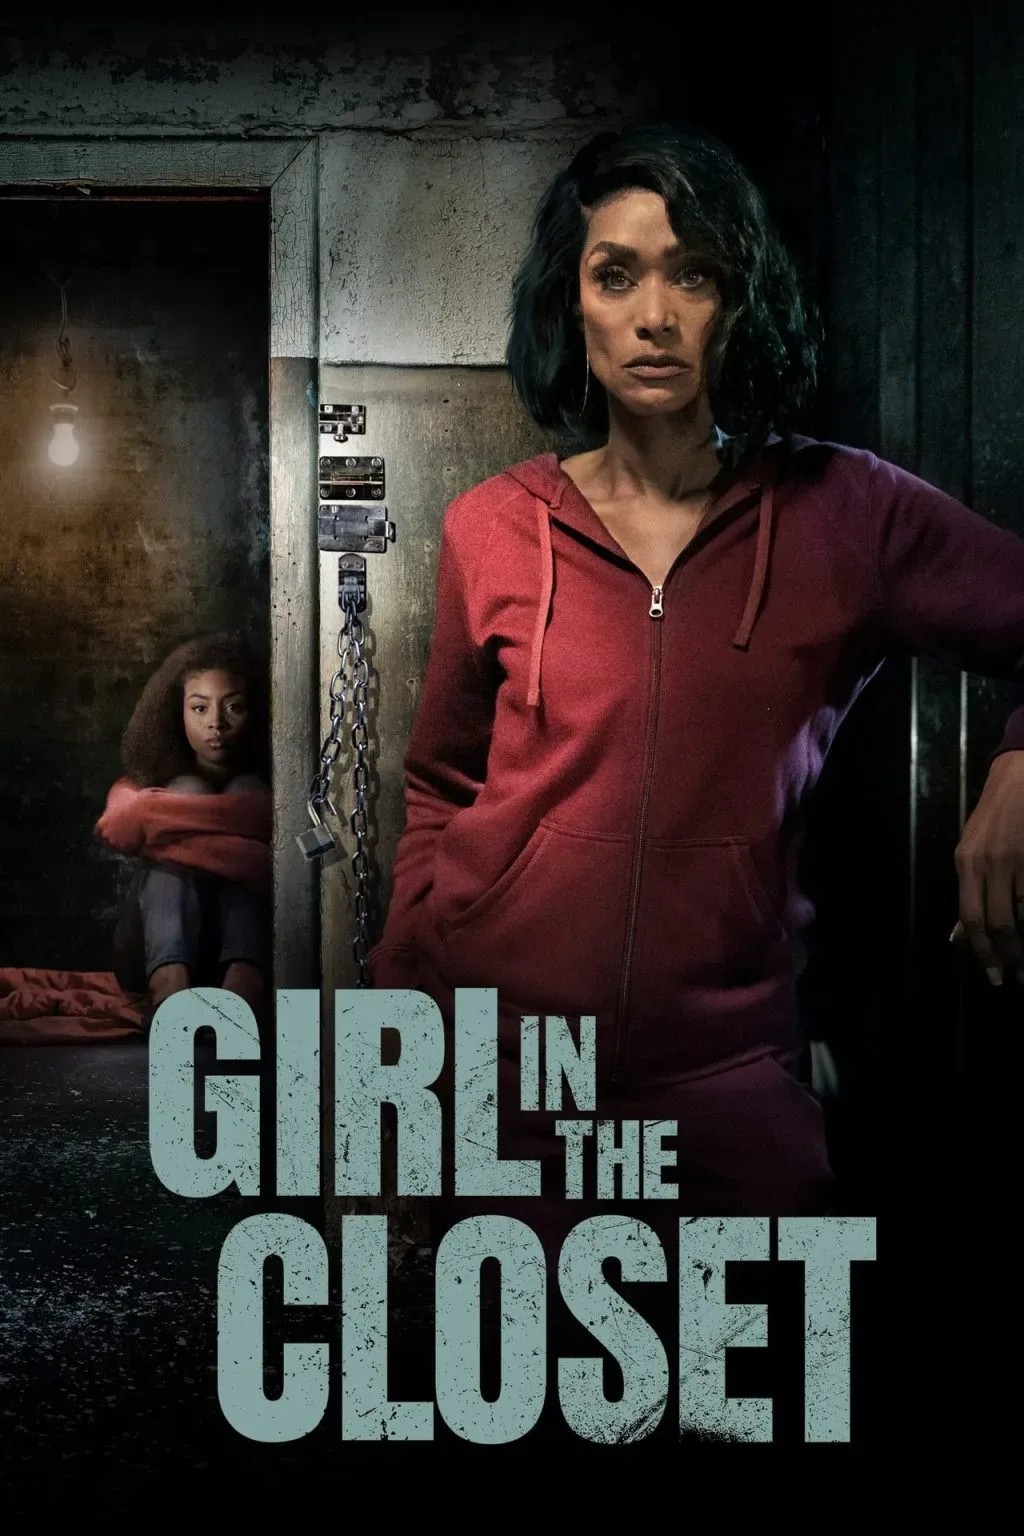 Based on real-life events, Girl In the Closet tells the story of 10 year old Cameron, who, after her mother suffered an aneurysm, was adopted by her Aunt Mia, who already had a husband and daughter of her own. Soon after arriving in her new home, Cameron started hearing strange, ghostly voices at night coming from the basement’s locked door. Little Cameron would soon discover what was actually behind that door, people chained to the wall, innocent victims of her Aunt’s schemes to enrich herself by cashing their benefit checks. It wasn’t long before Cameron was demoted down into the basement herself, where she would stay for the next ten years while police thought she was missing.